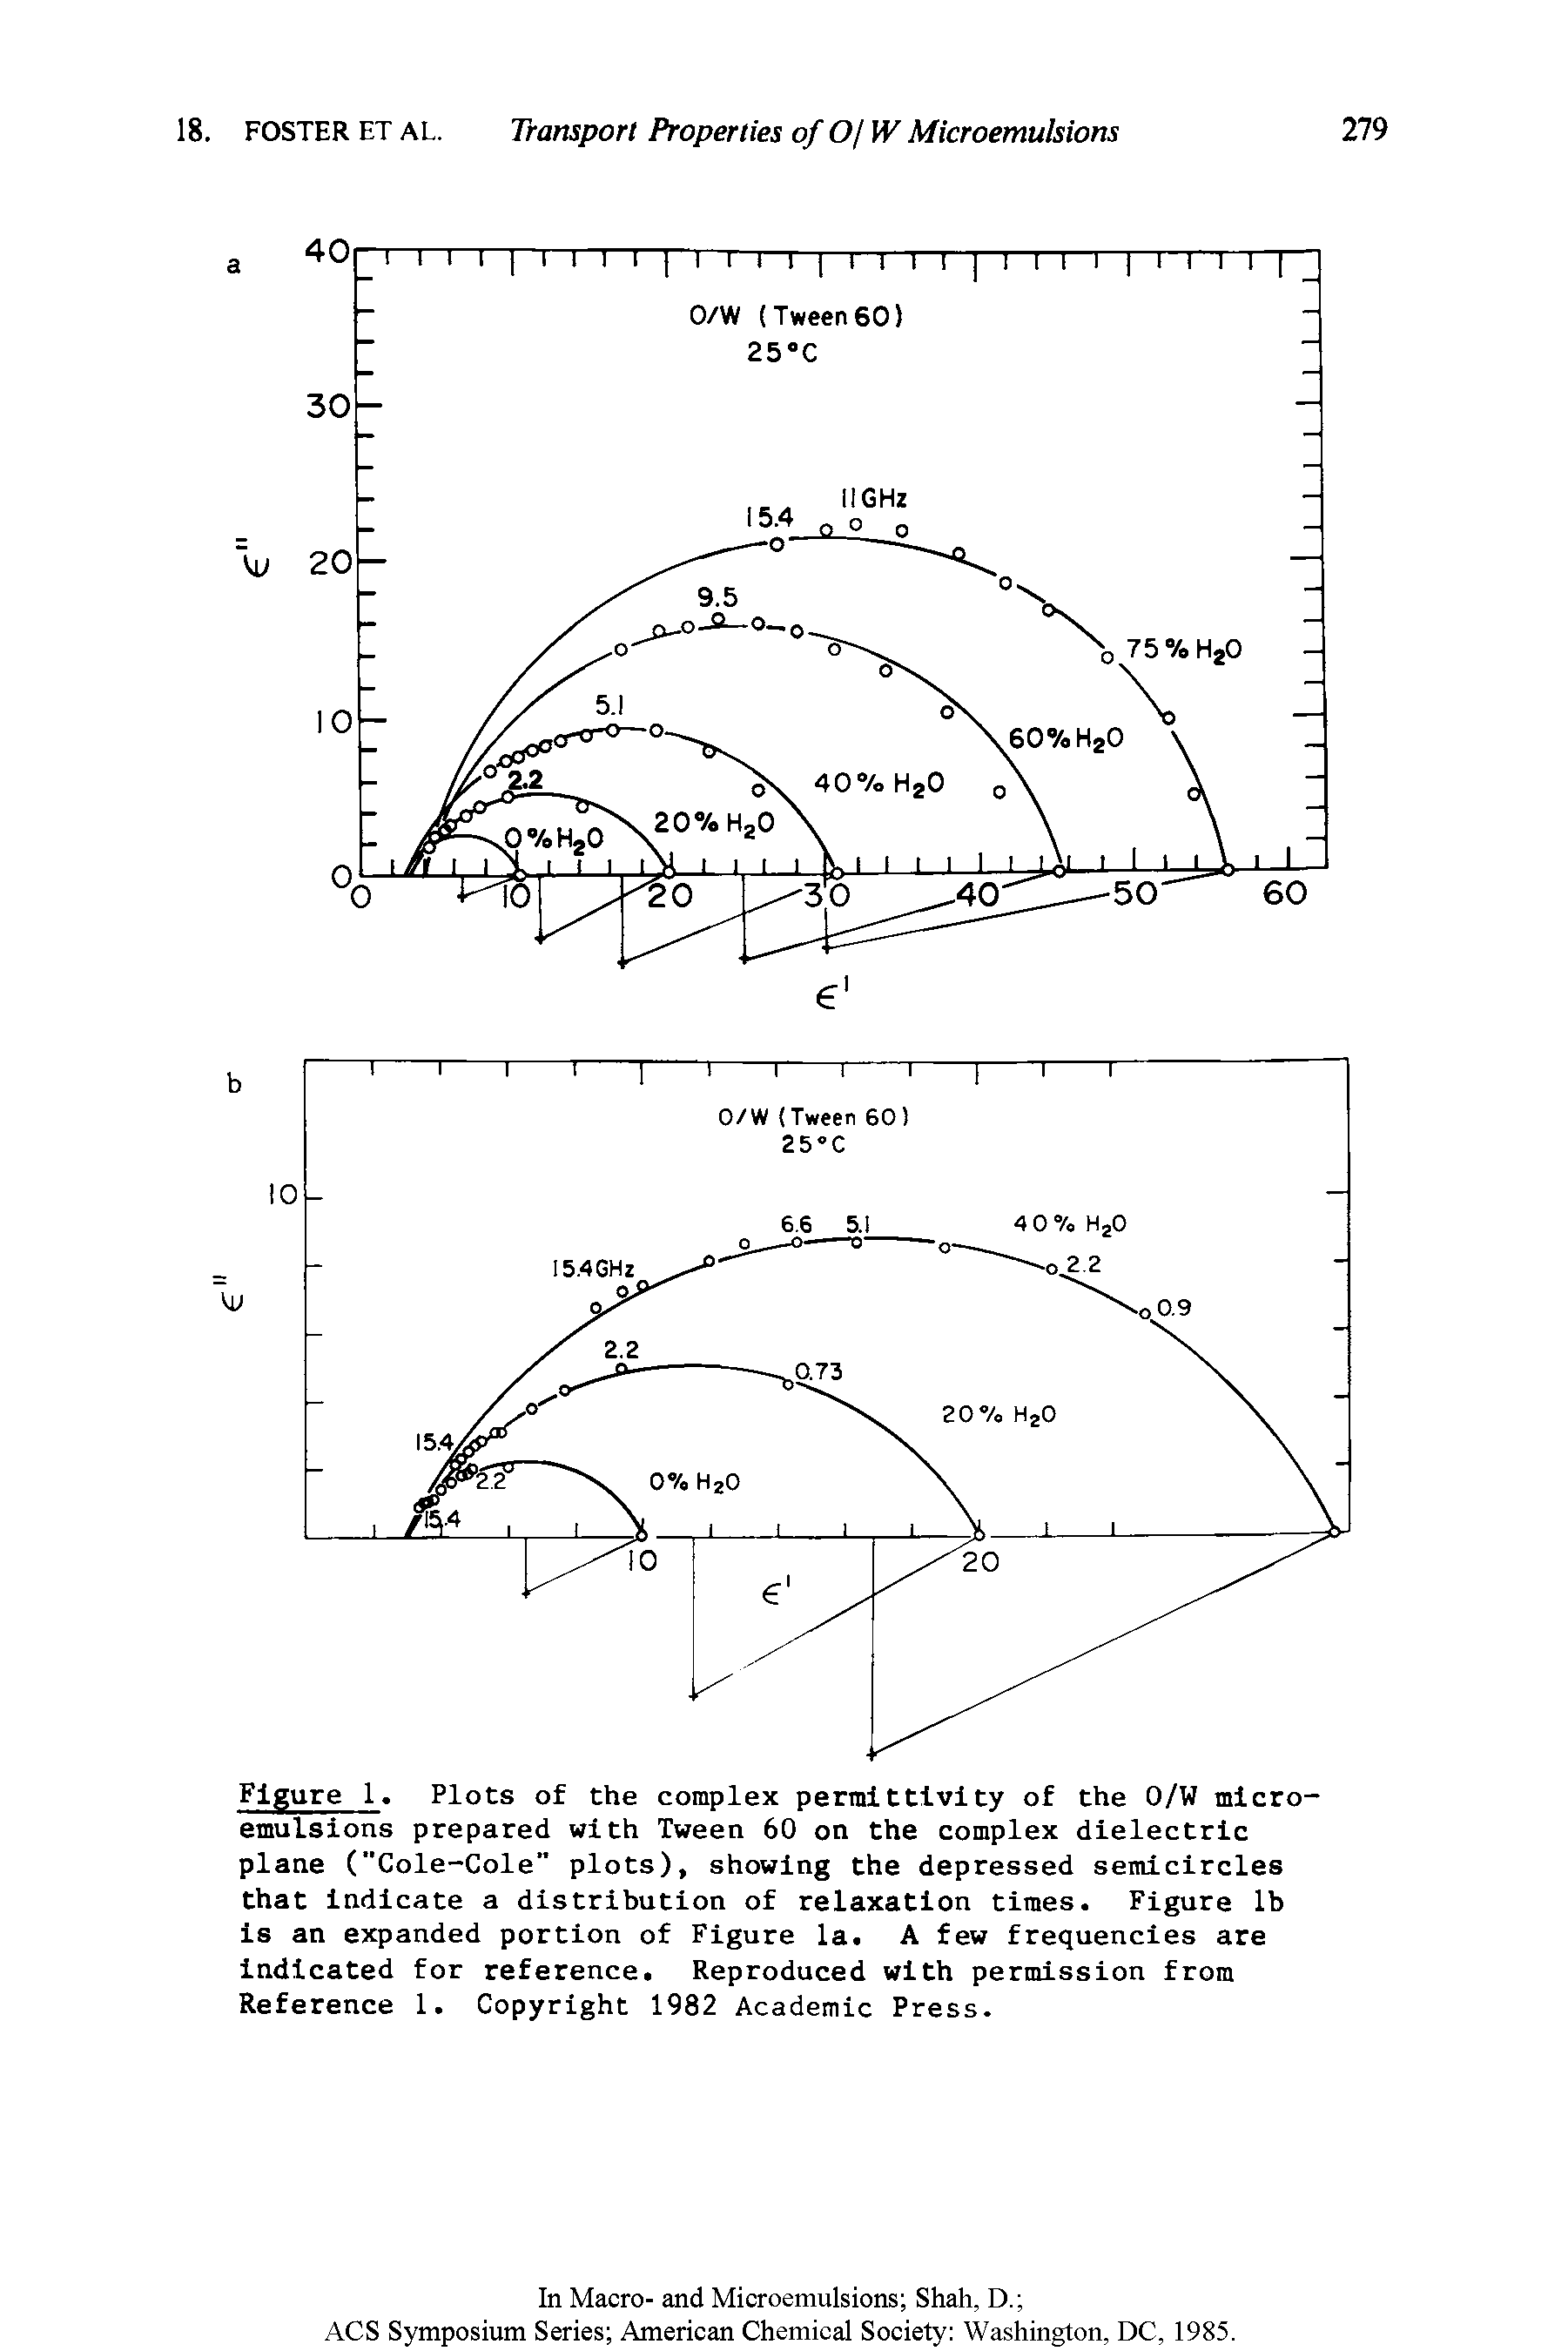 Figure 1. Plots of the complex permittivity of the 0/W microemulsions prepared with Tween 60 on the complex dielectric plane ("Cole-Cole" plots), showing the depressed semicircles that indicate a distribution of relaxation times. Figure lb is an expanded portion of Figure la. A few frequencies are indicated for reference. Reproduced with permission from Reference 1. Copyright 1982 Academic Press.